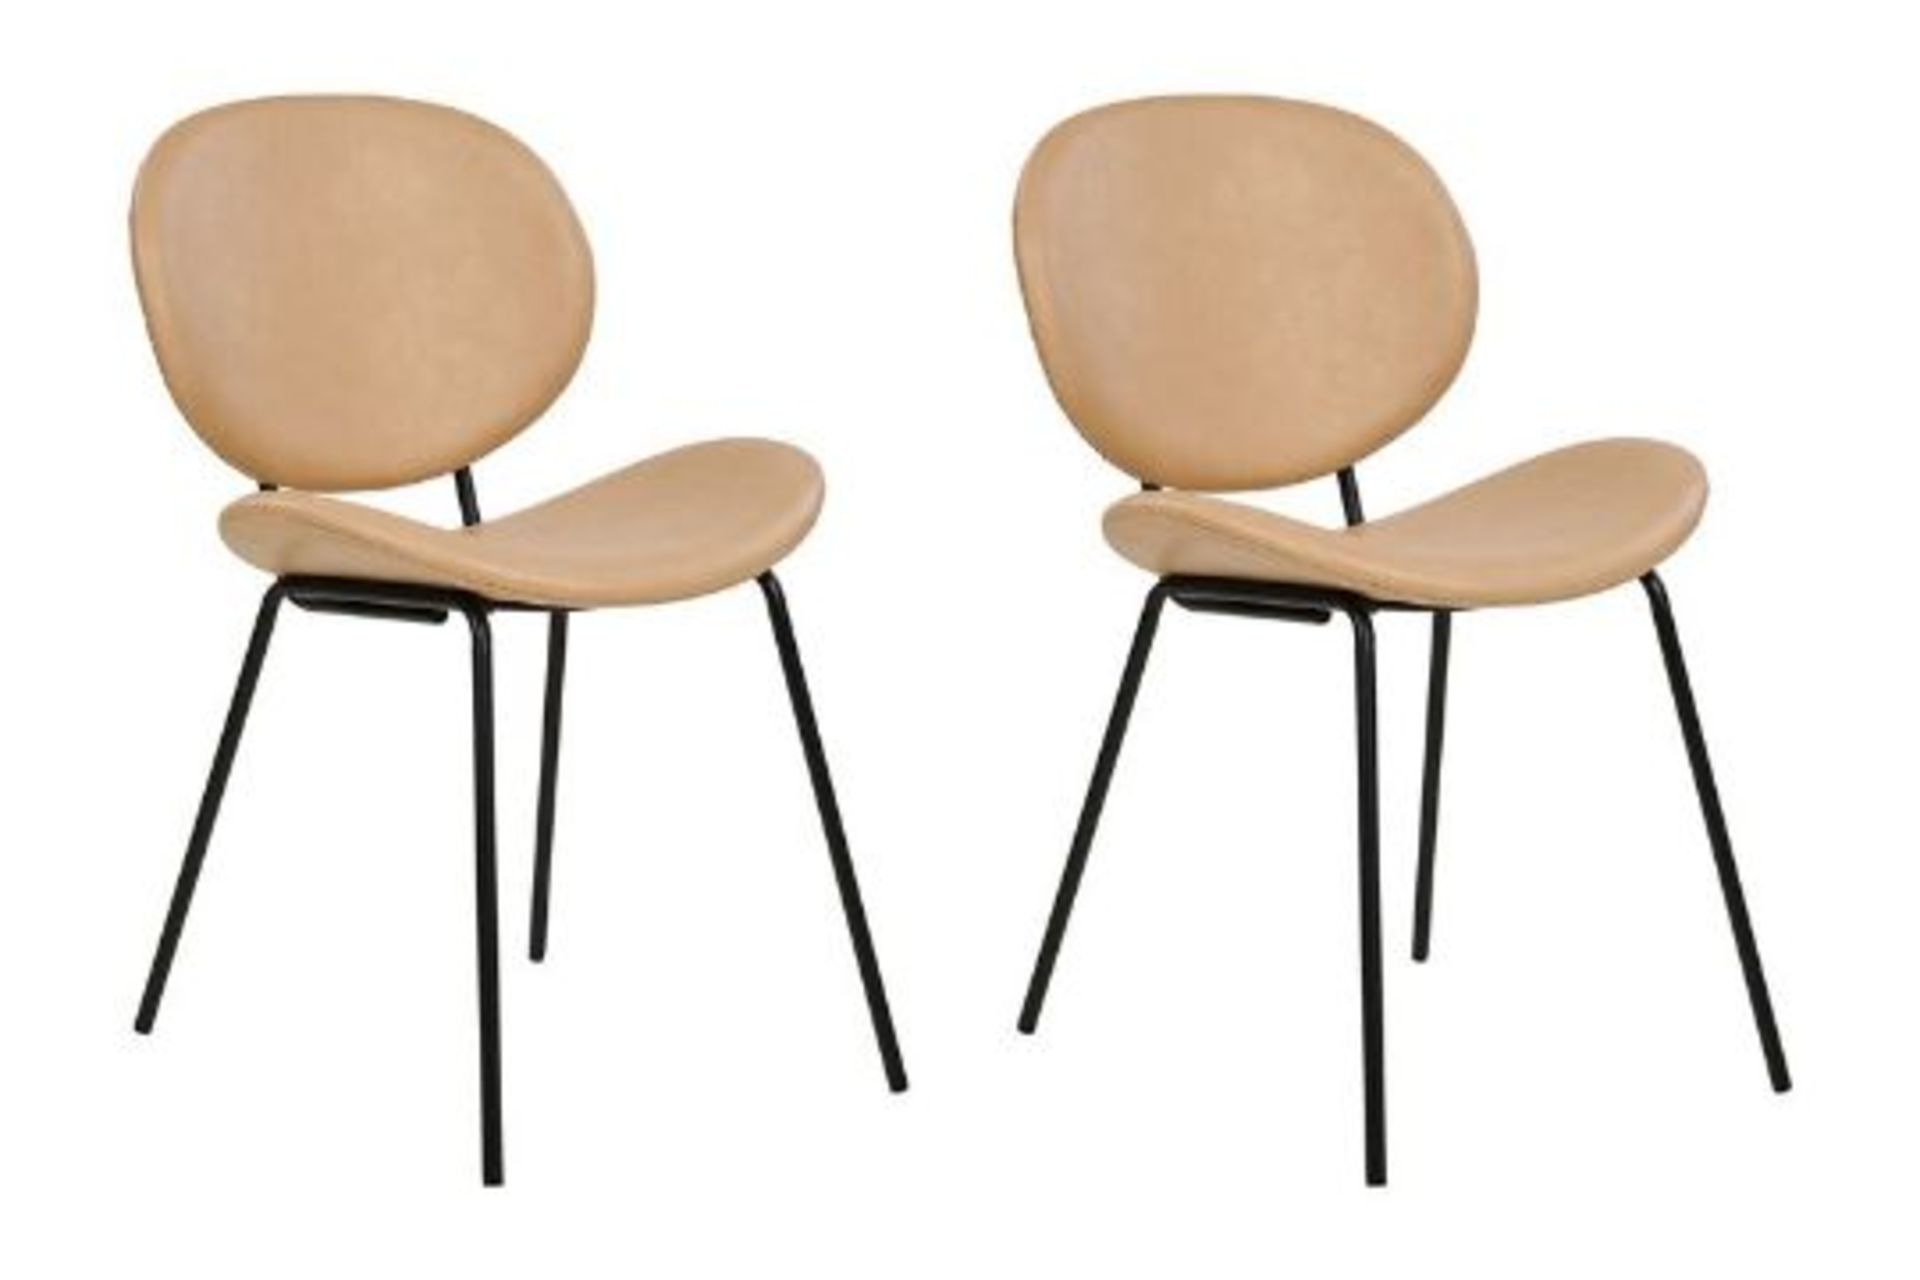 Luana Set of 2 Faux Leather Dining Chairs Sand Beige 74/12. - ER23. RRP £199.99. Add some flair